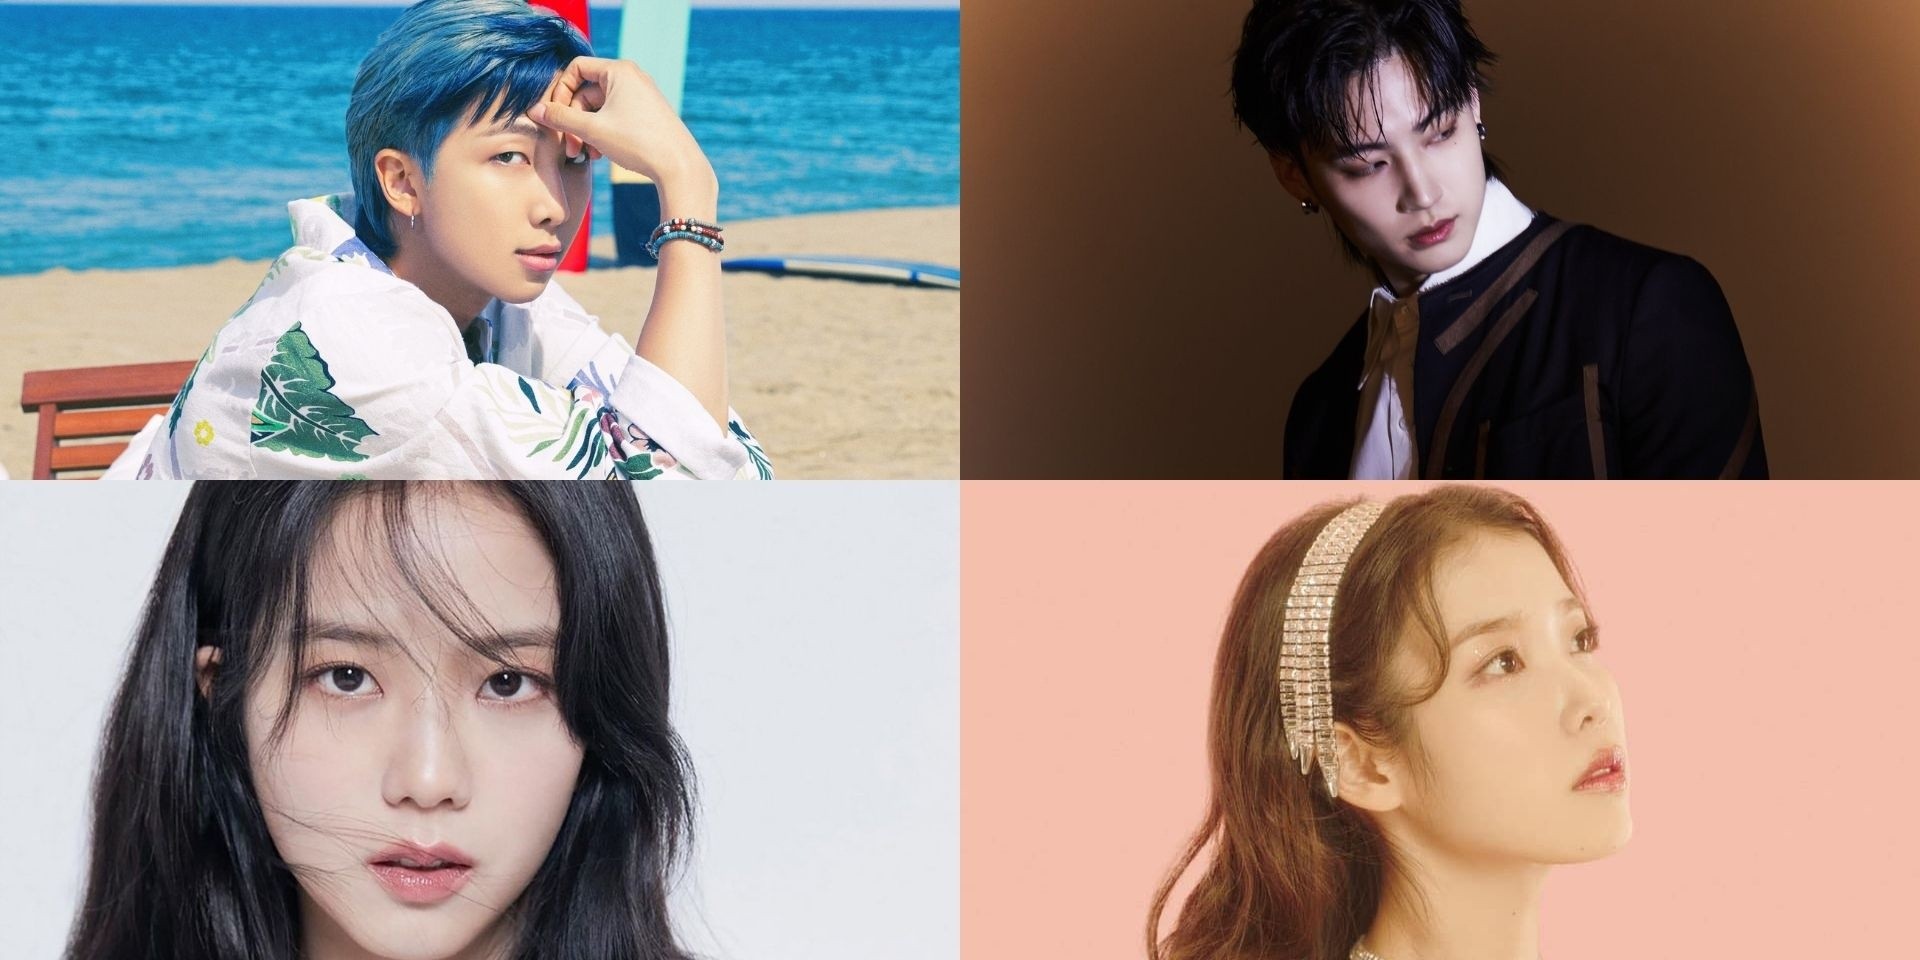 7 must-read books according to your favourite K-pop artists, including BTS' RM, GOT7’s JAY B, BLACKPINK’s Jisoo, IU, and more